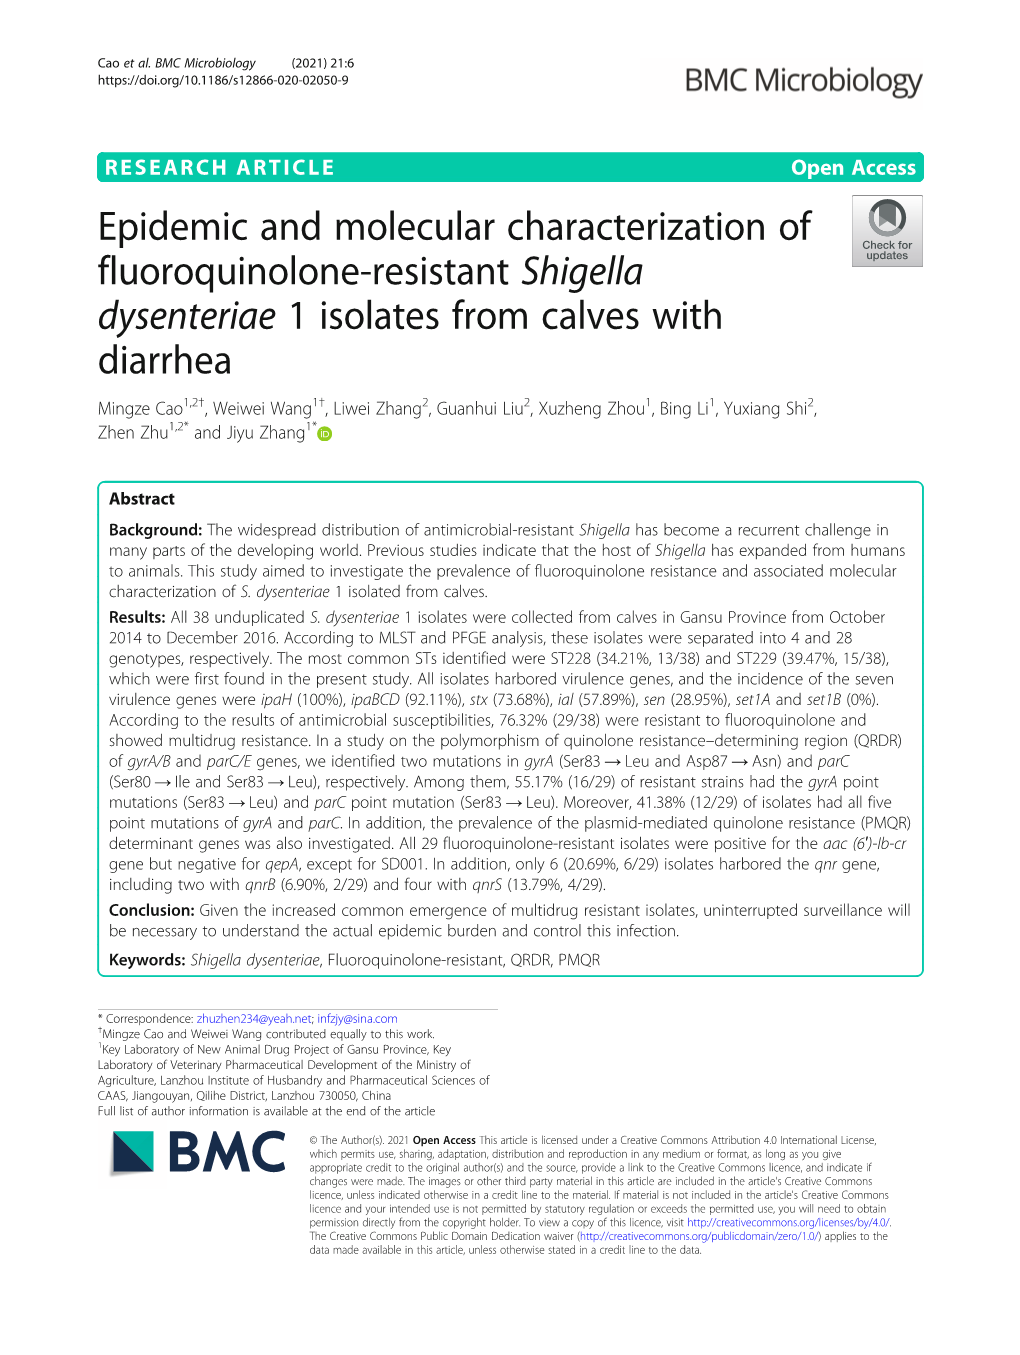 Epidemic and Molecular Characterization of Fluoroquinolone